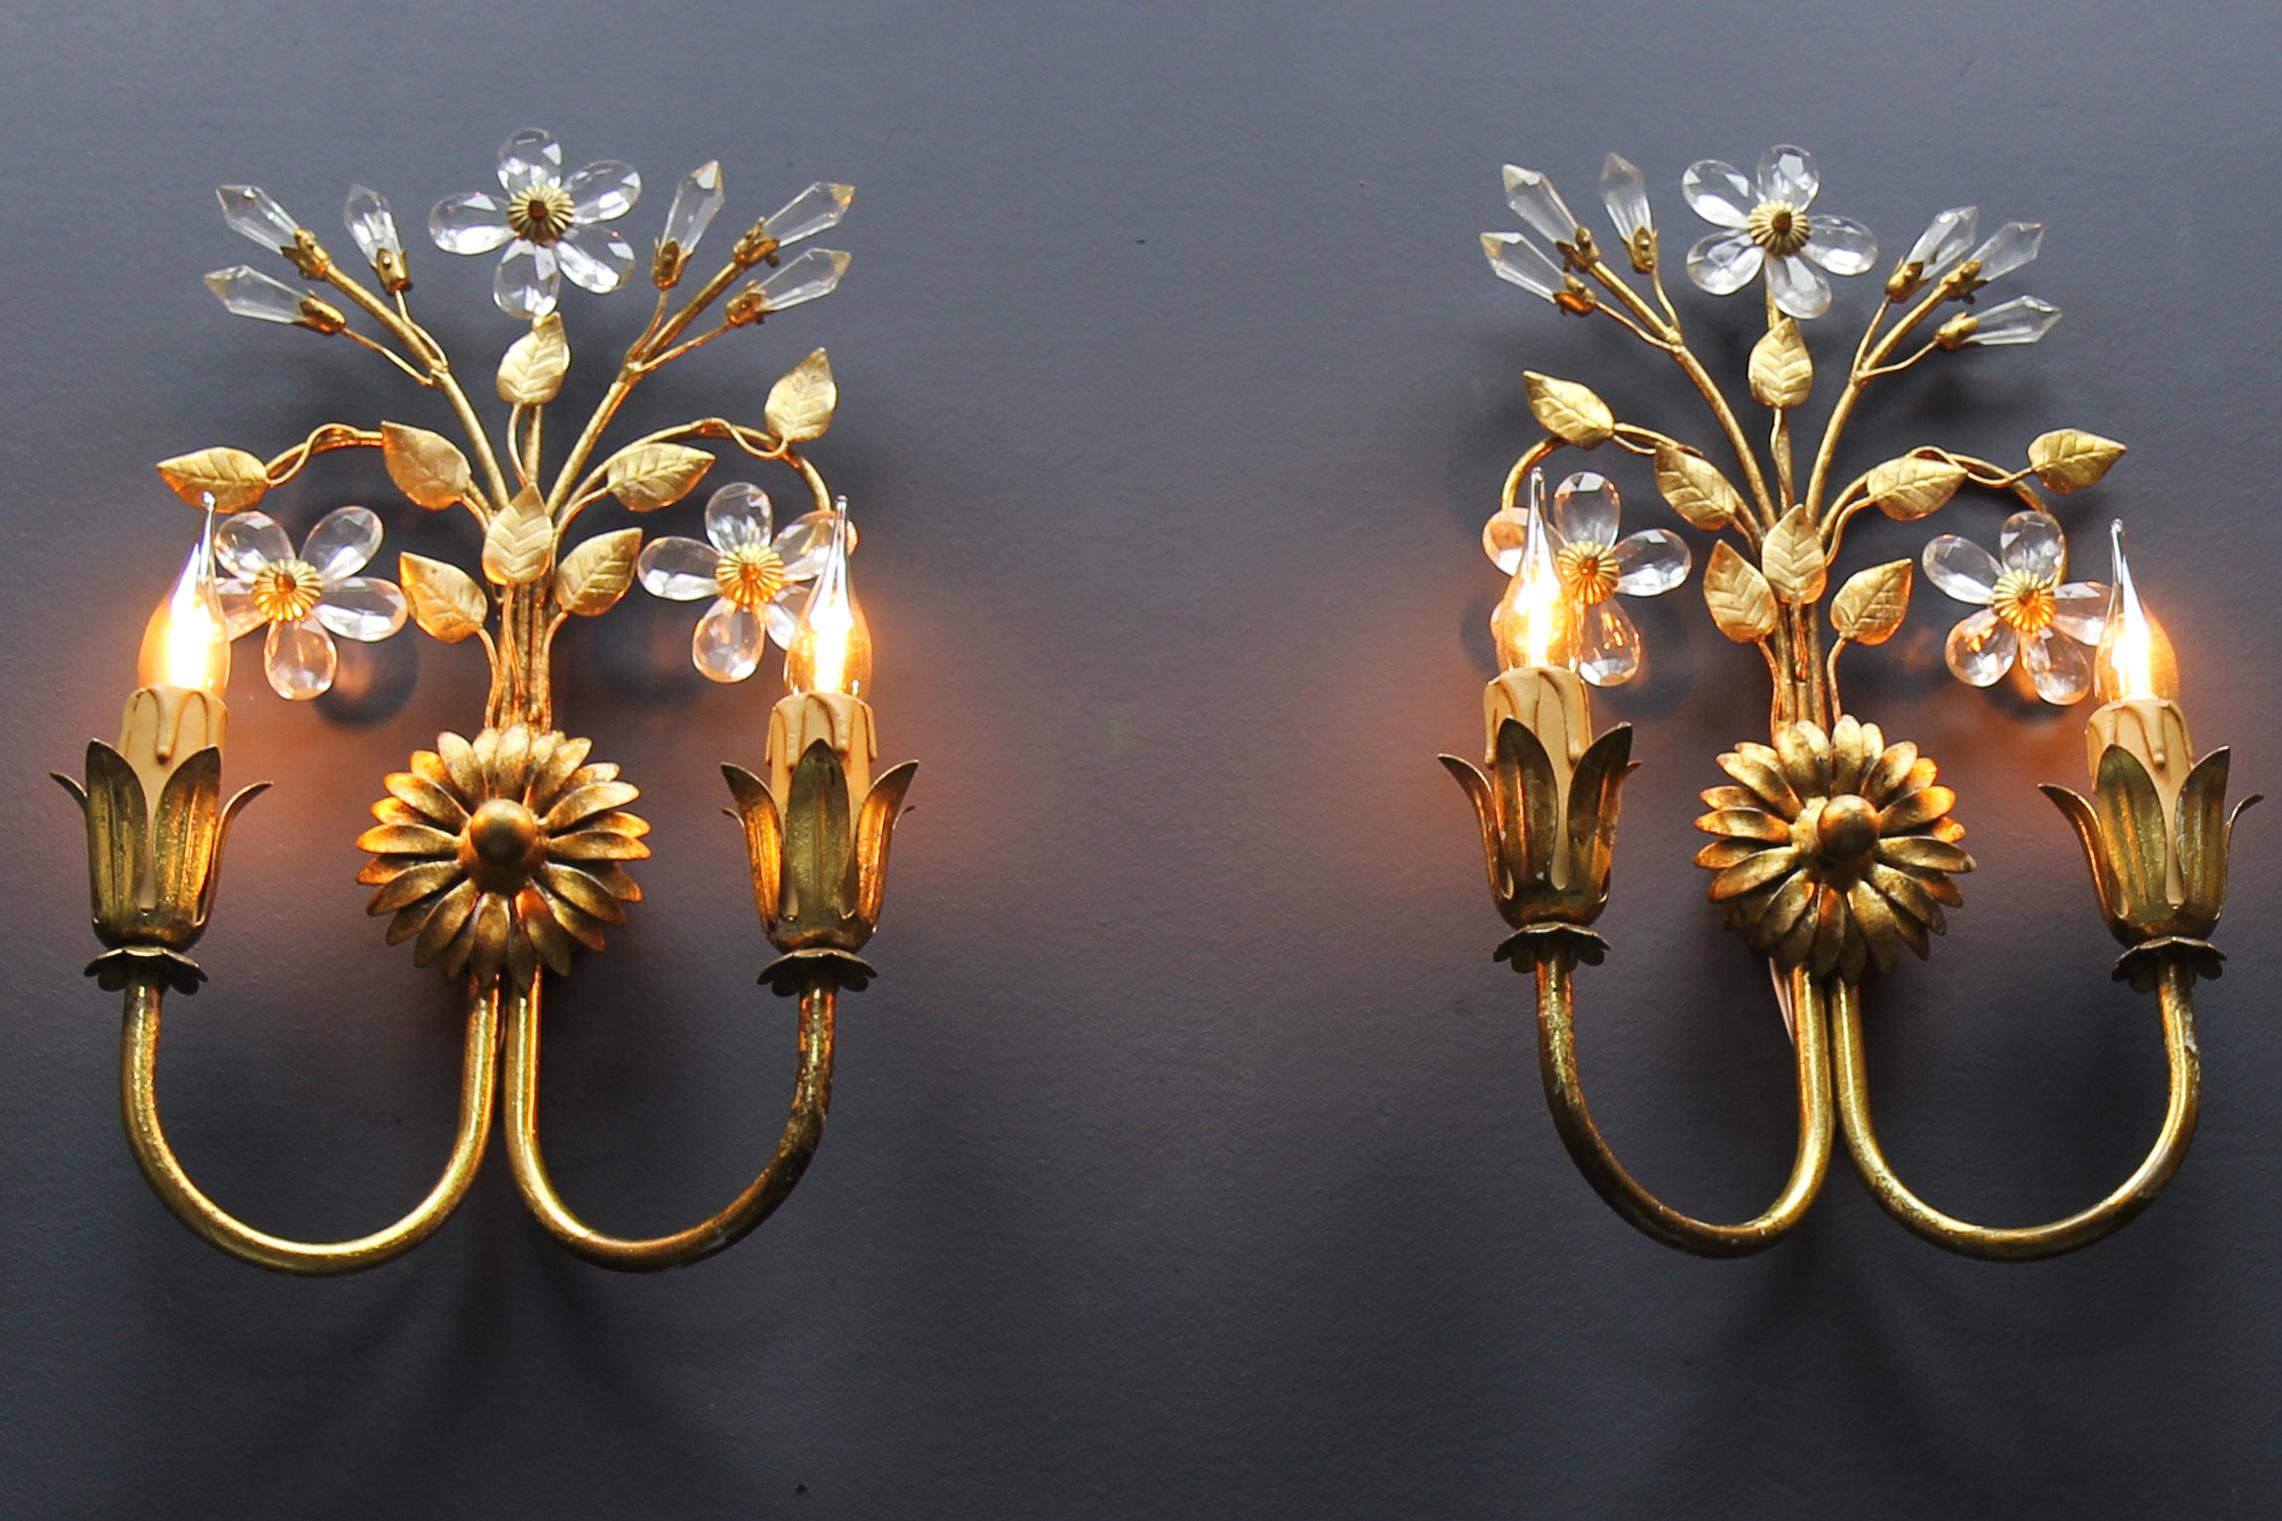 Pair of Hollywood Regency Style Italian Gilt Metal and Glass Flower Sconces 16